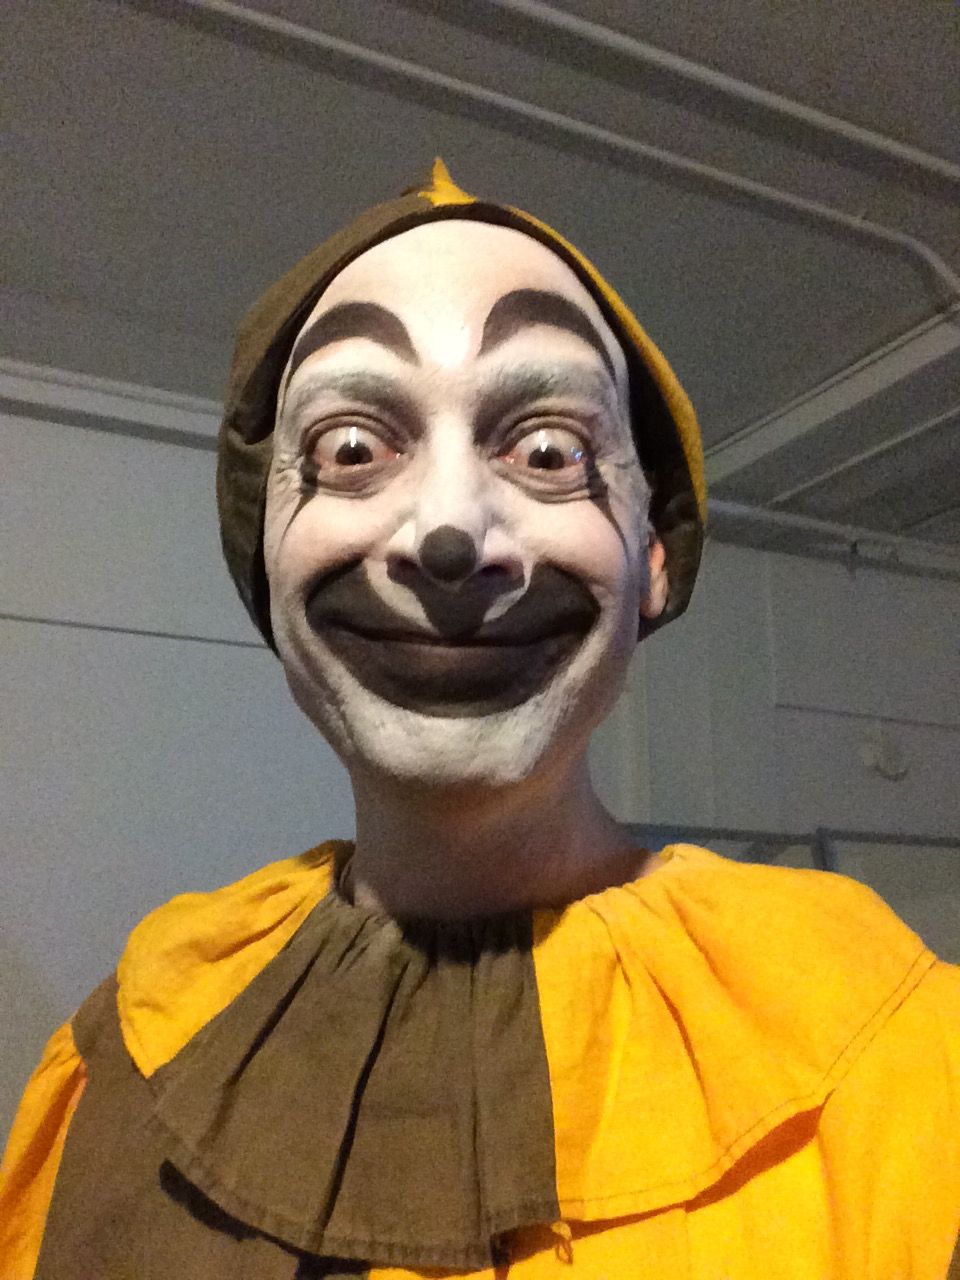 Actor Jeff Blumberg as The Clown on the set of the web series The Hotel Barclay